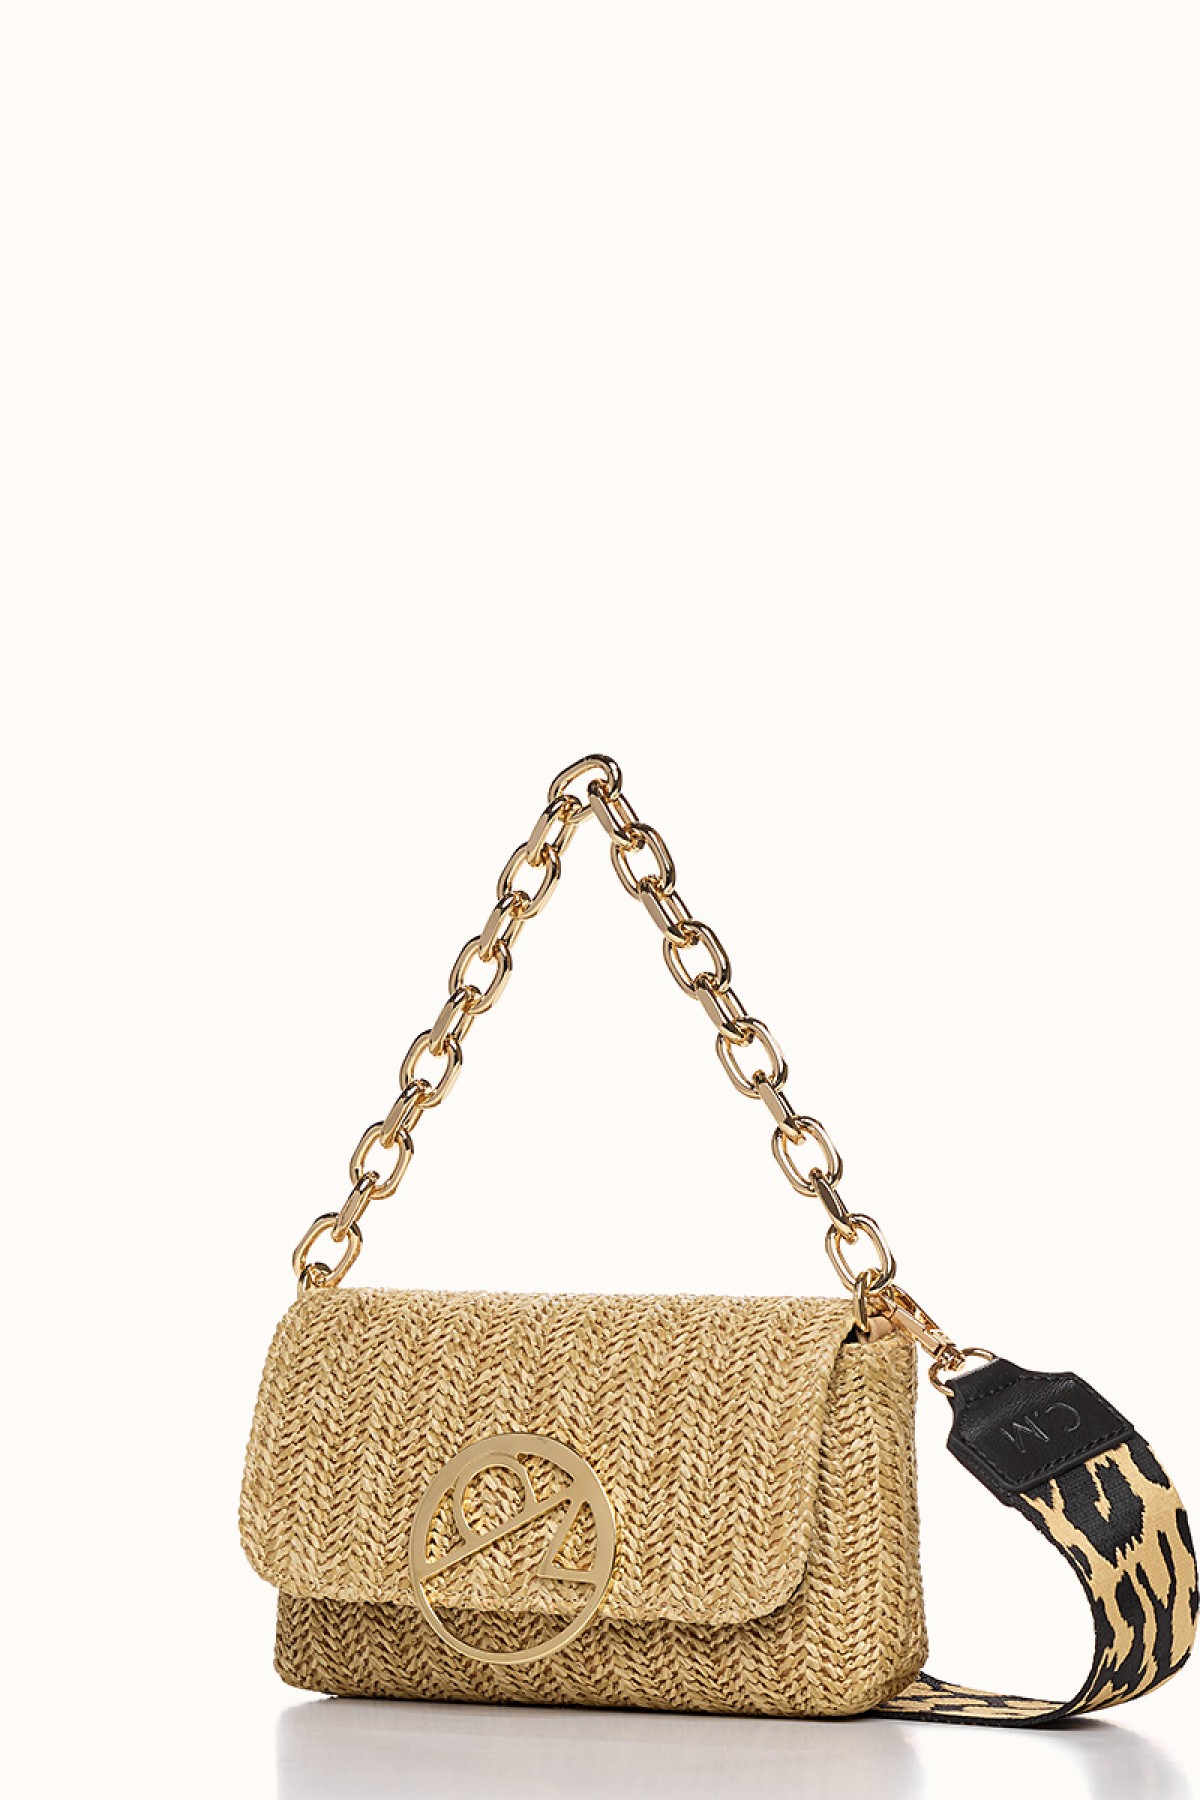 NATURAL STRAW ALL DAY ΜΙΝΙ BAG